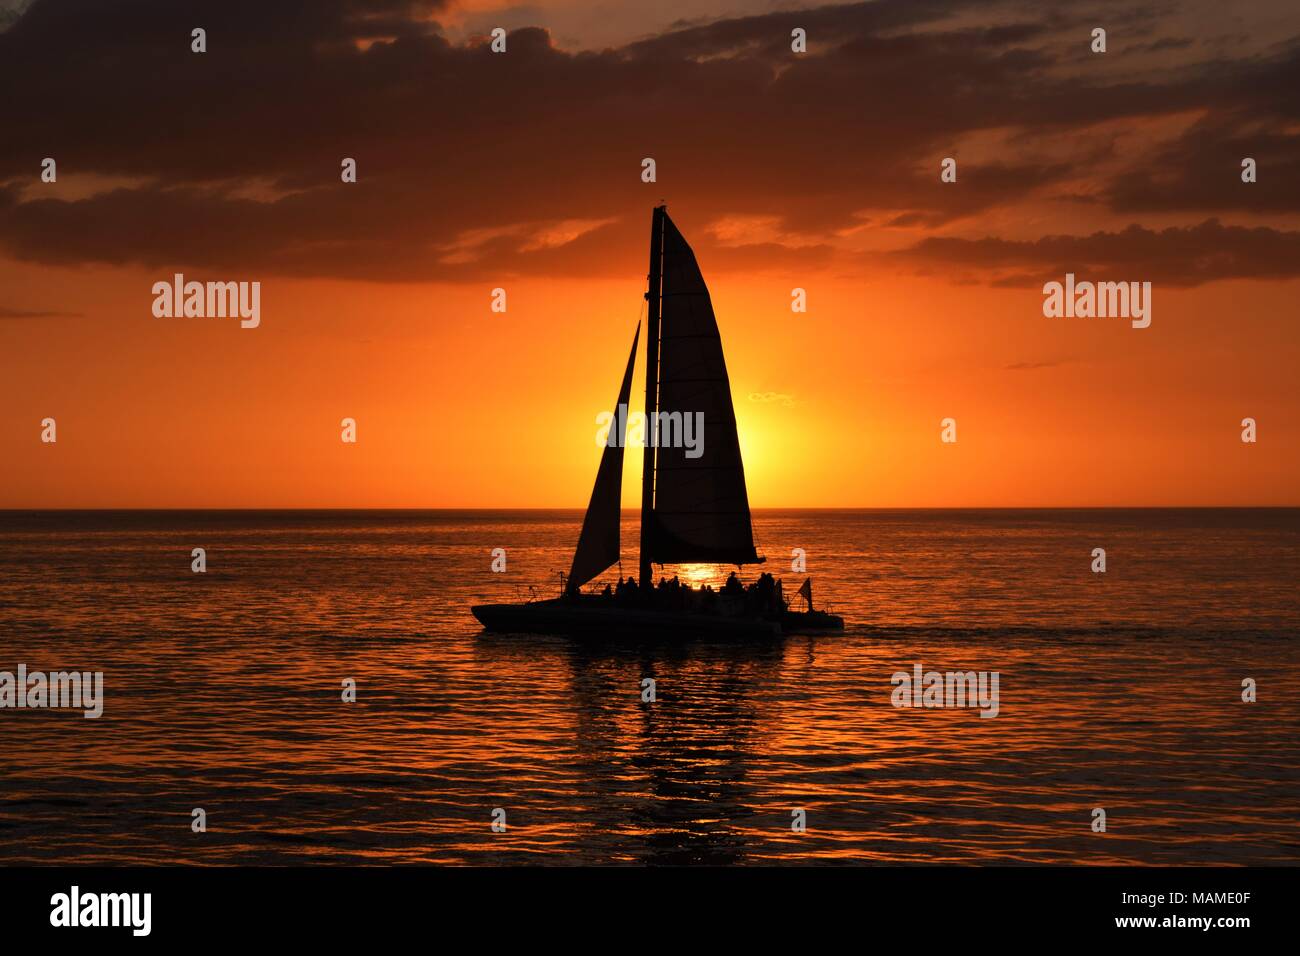 Silhouette of Sailboat During Sunset Stock Photo